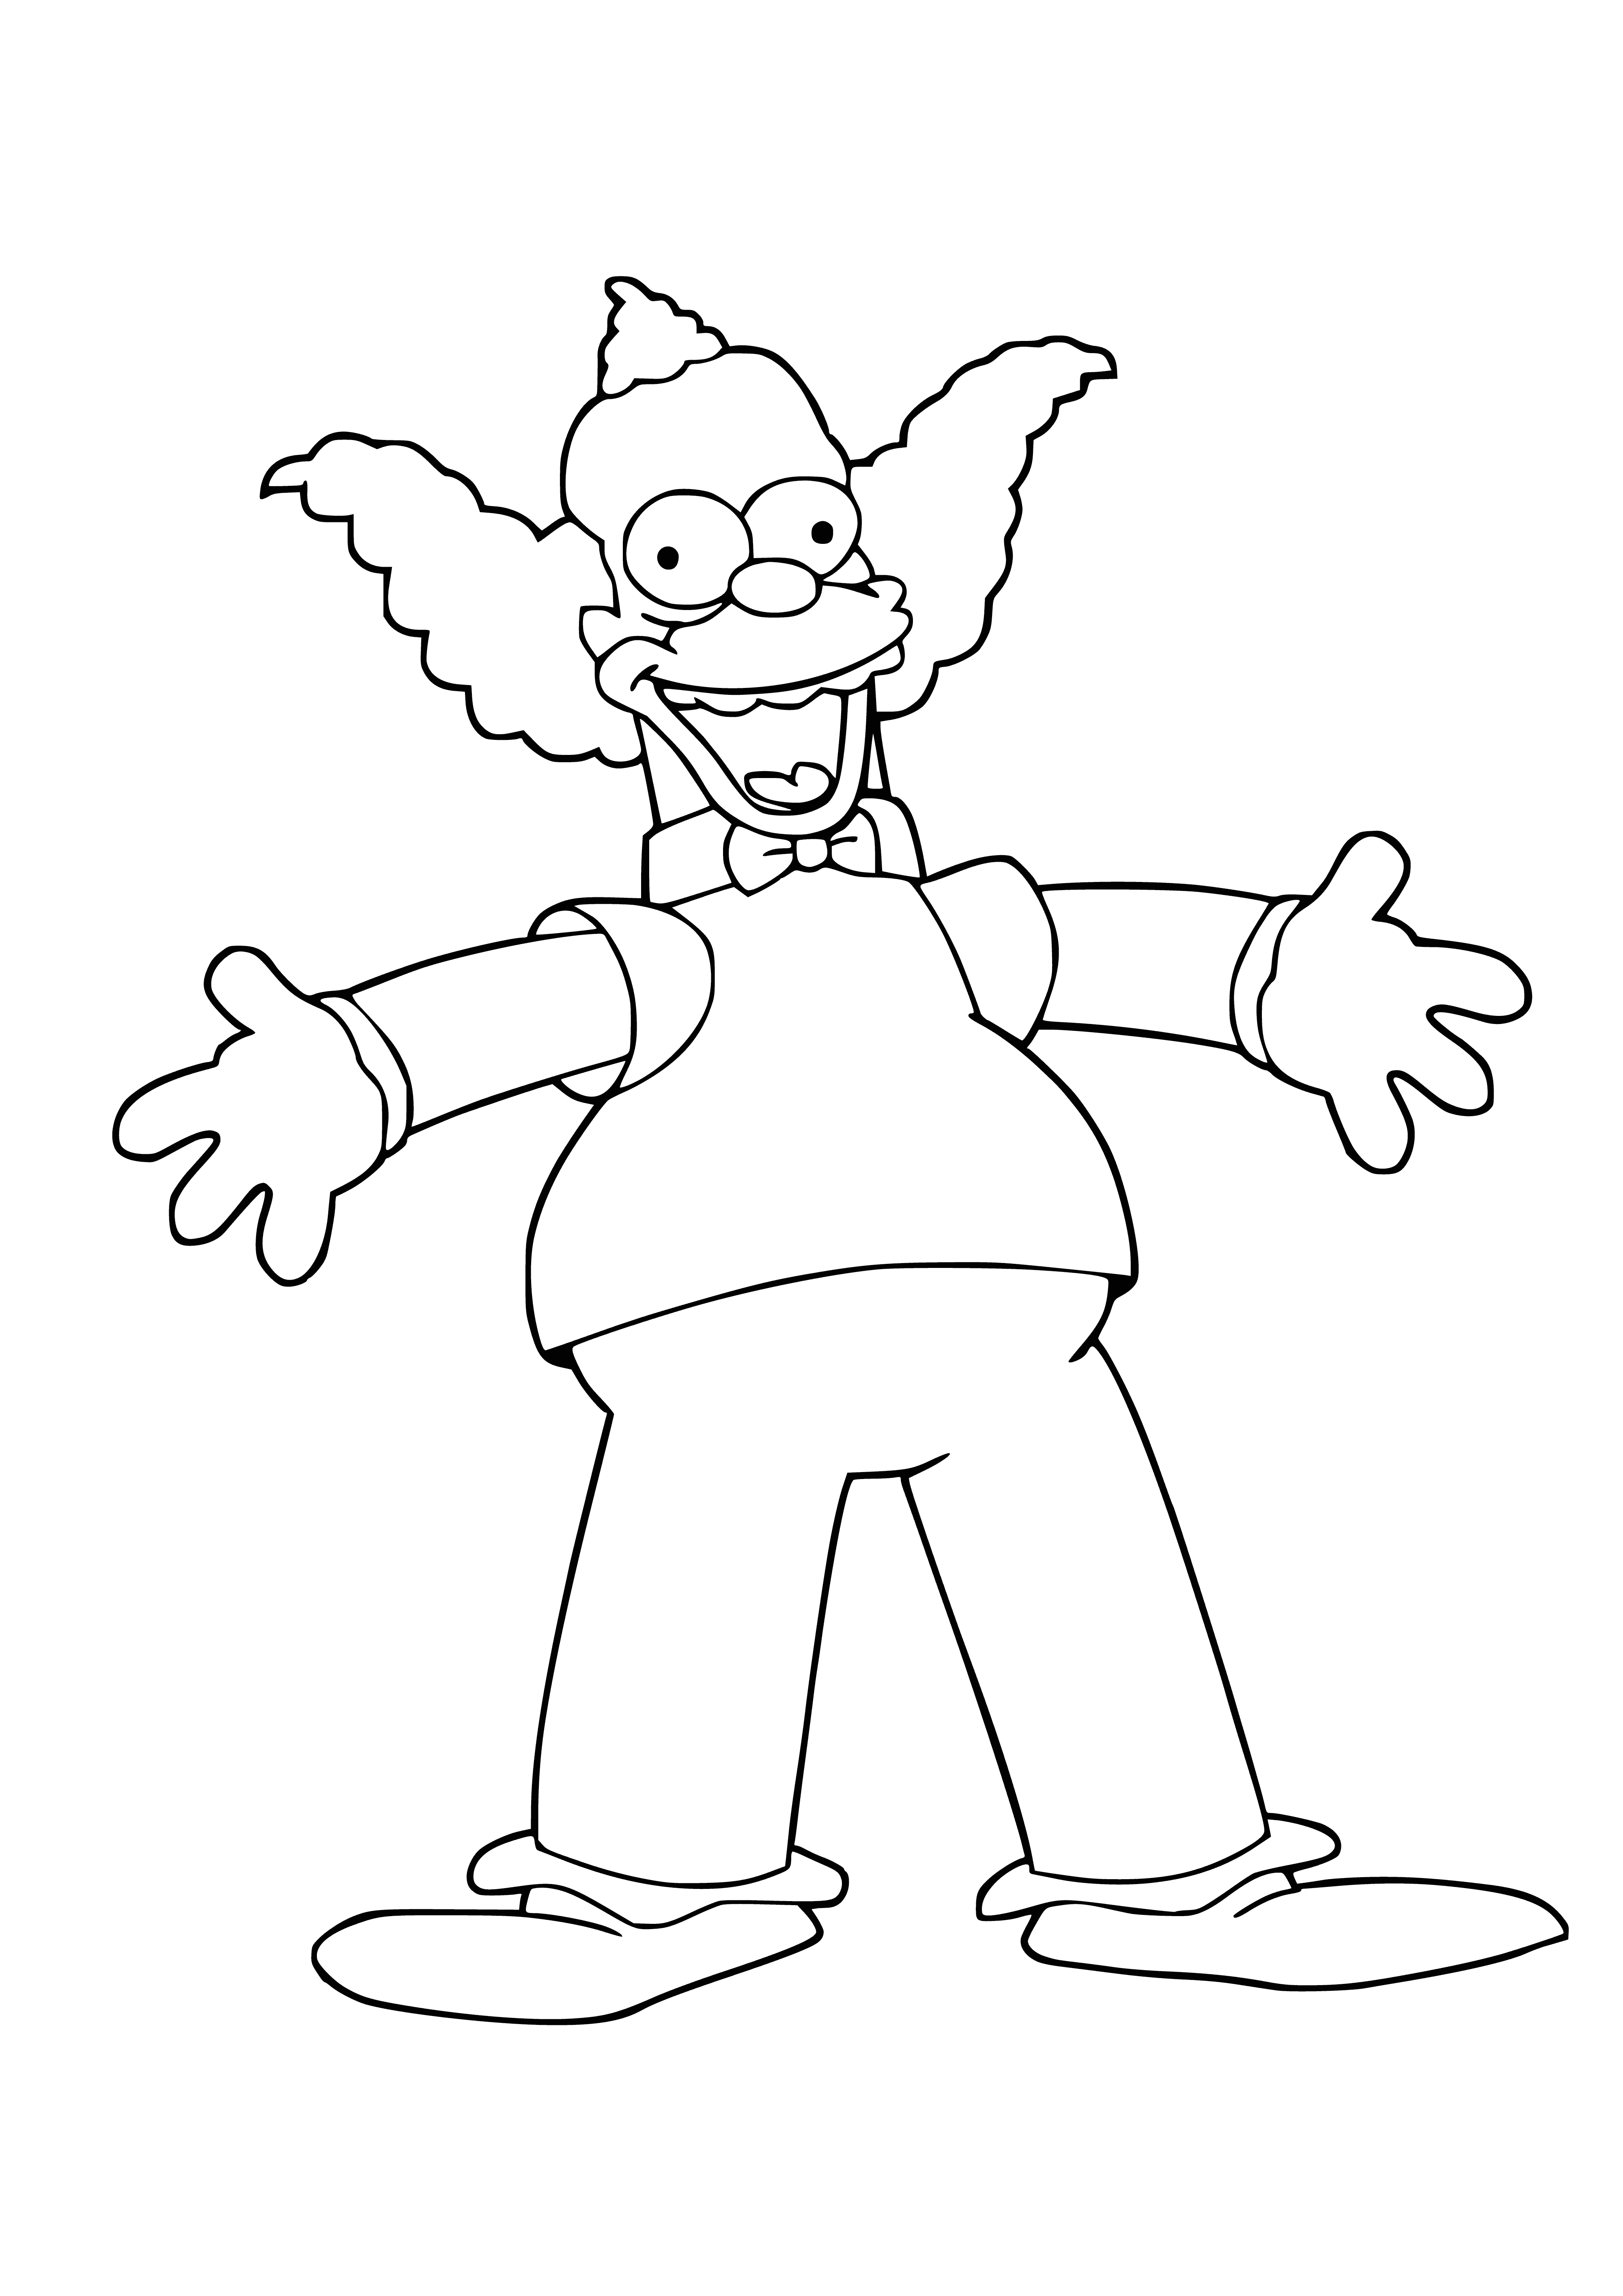 Clown Krasty coloring page